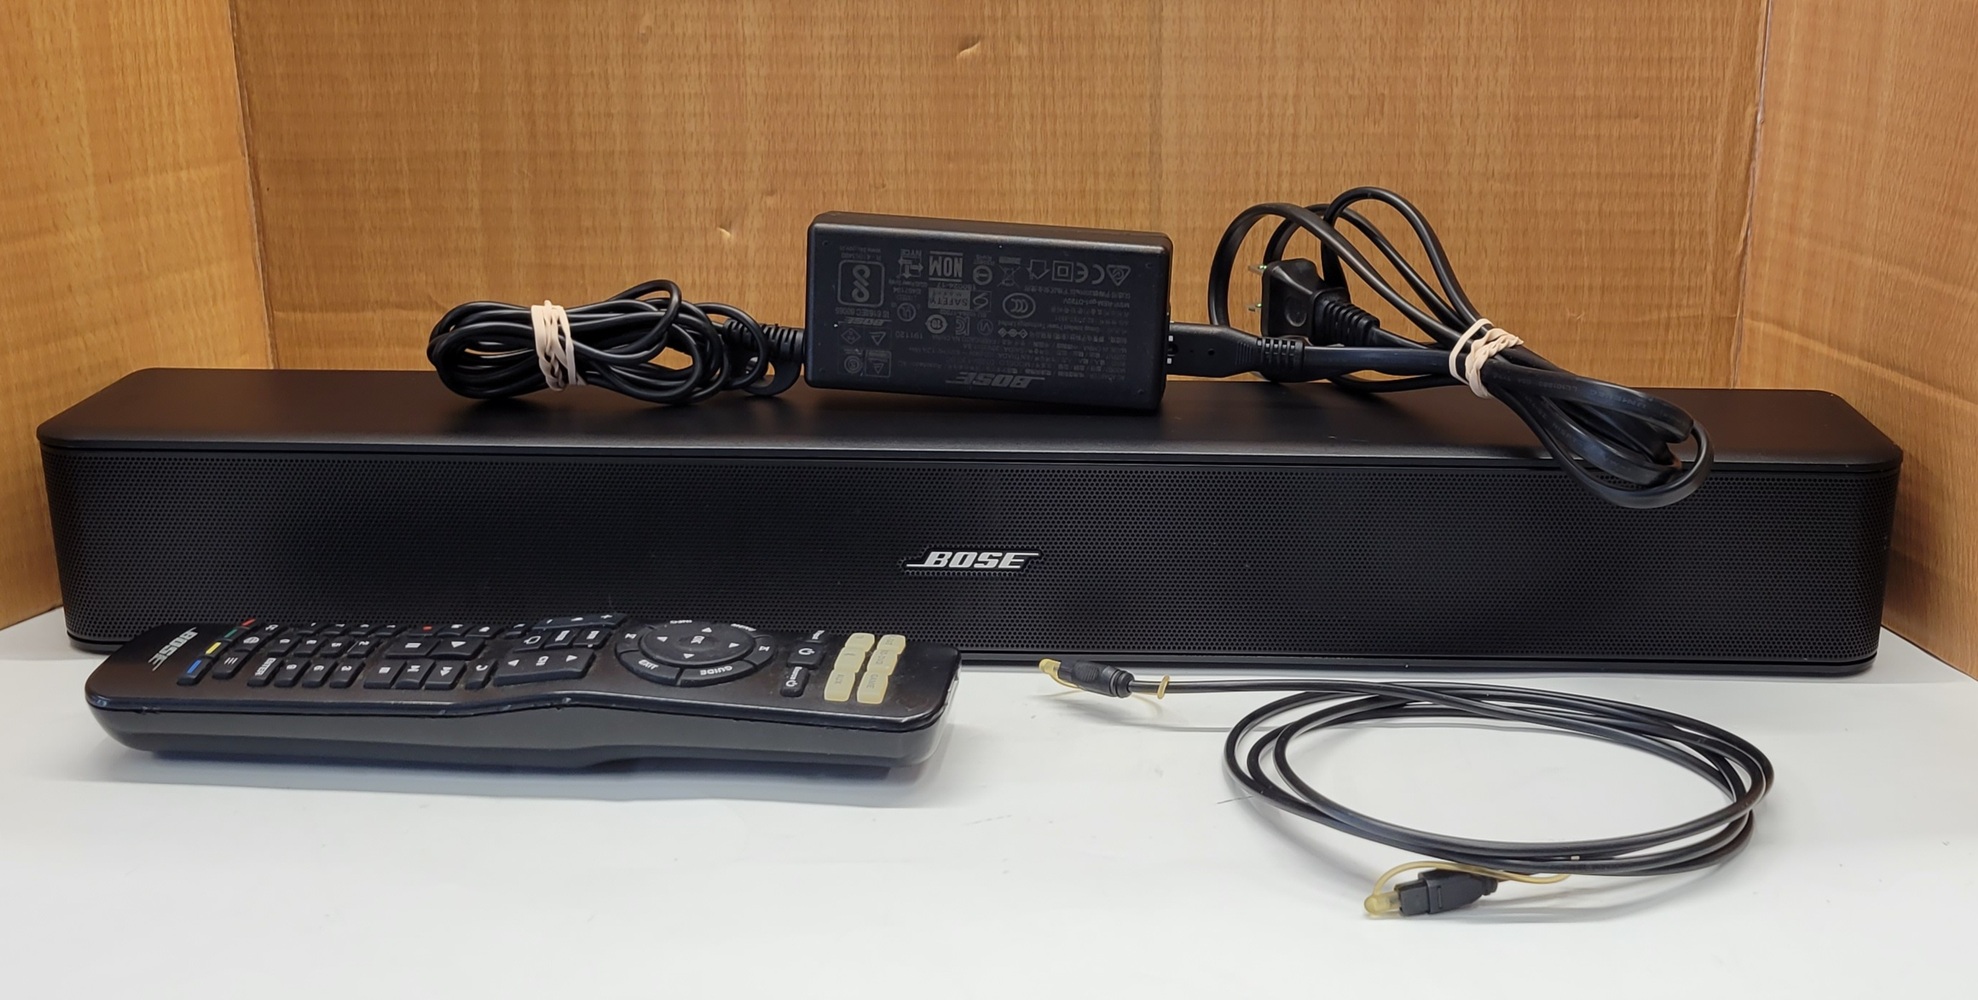 Bose Solo 5 T.V. Sound System Model 418775 | Avenue Shop Swap & Sell